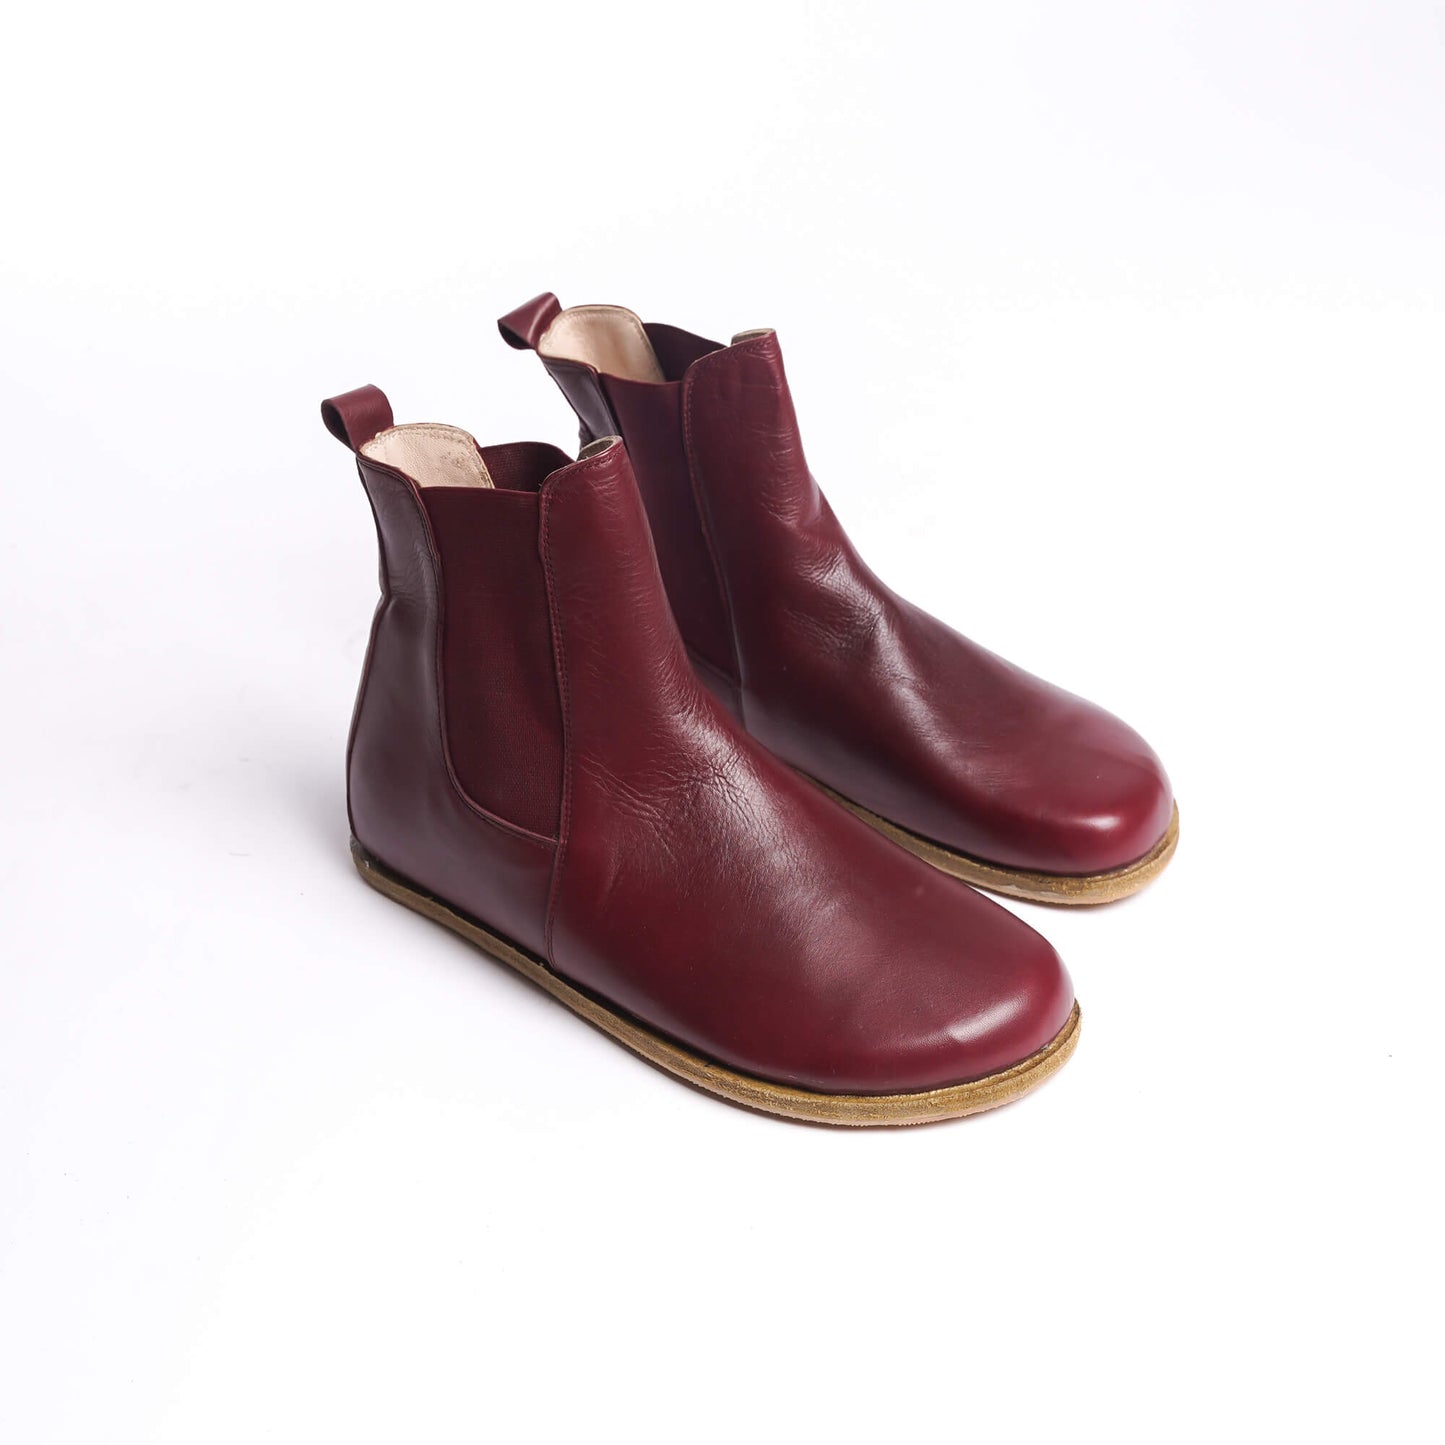 Pair of men's burgundy Chelsea boots, made from genuine leather with elastic side panels for a sophisticated and comfortable fit.